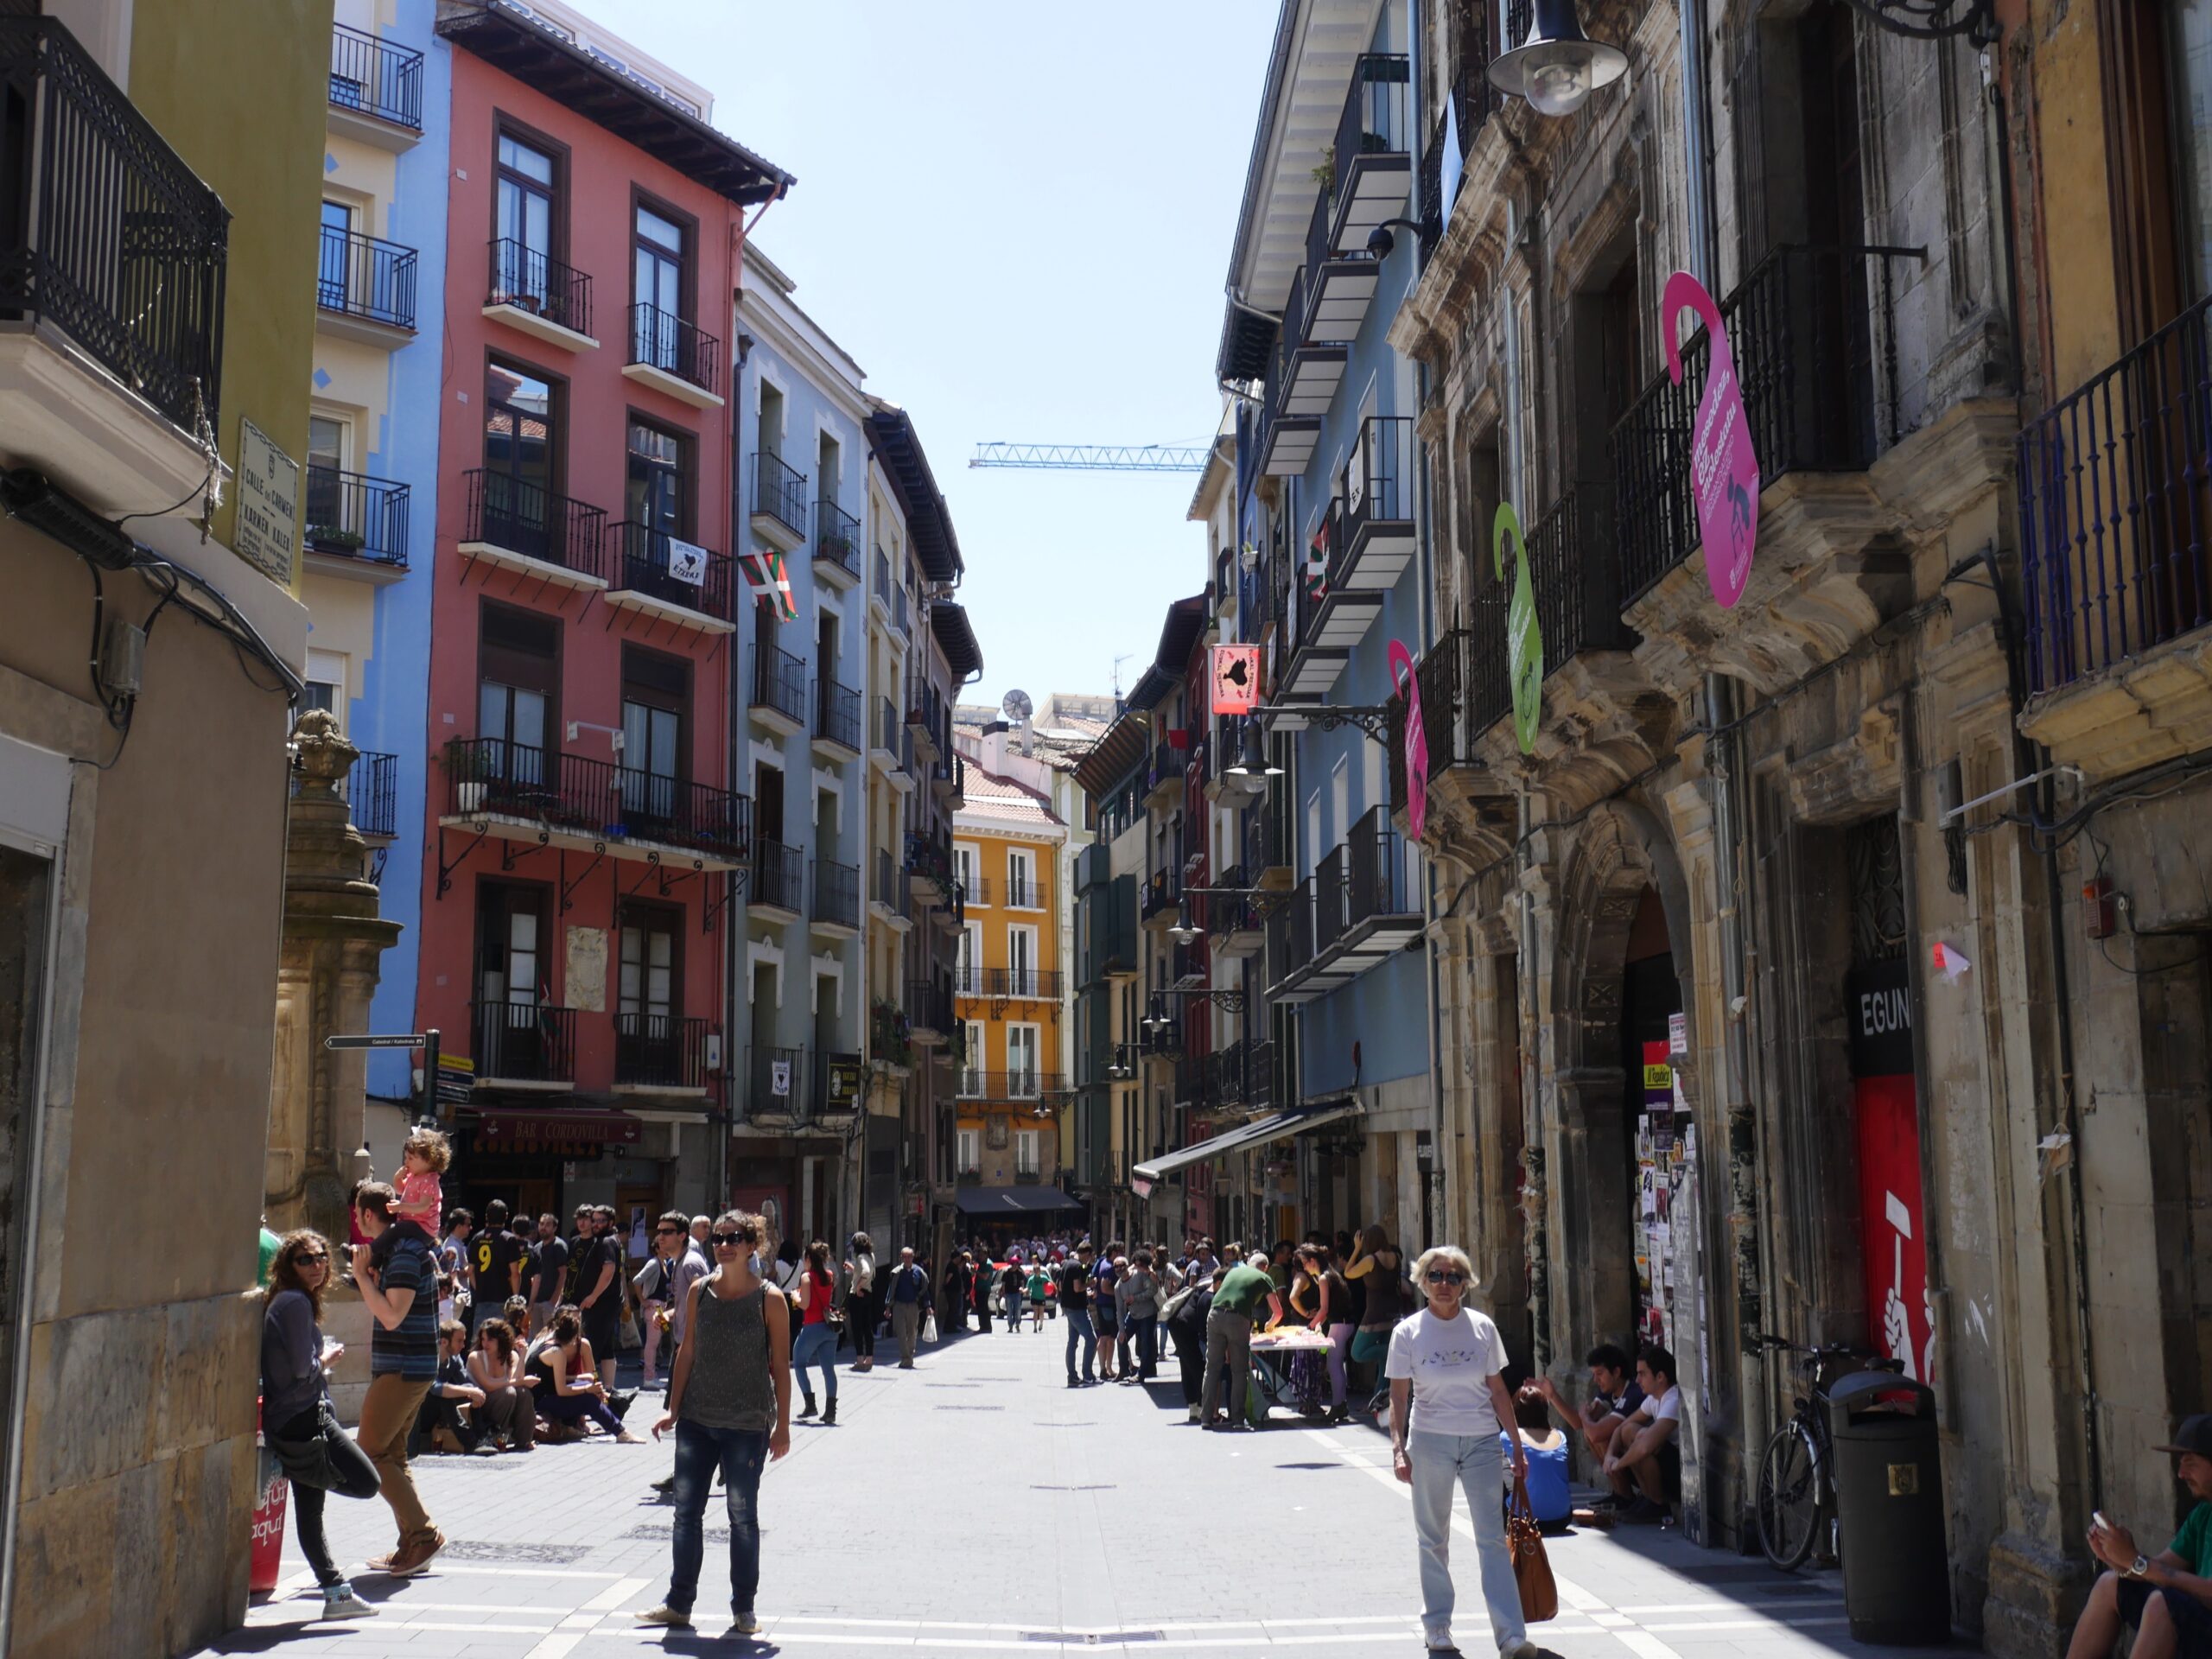 People fill the streets of Pamplona, Spain on a Saturday evening.